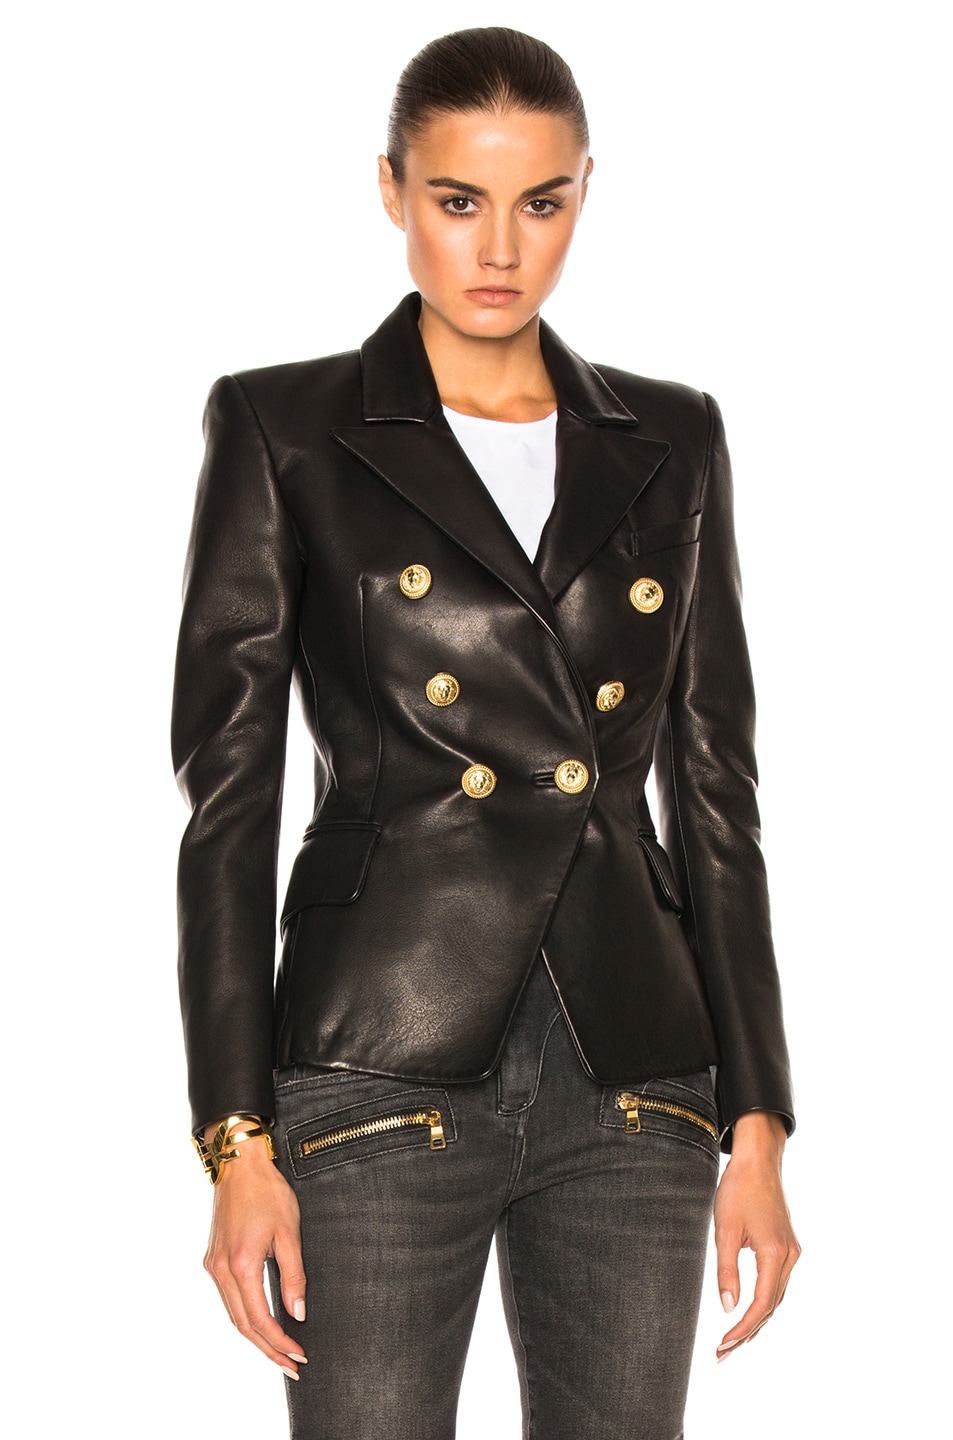 BALMAIN Six-Button Double-Breasted Leather Jacket in Black | ModeSens